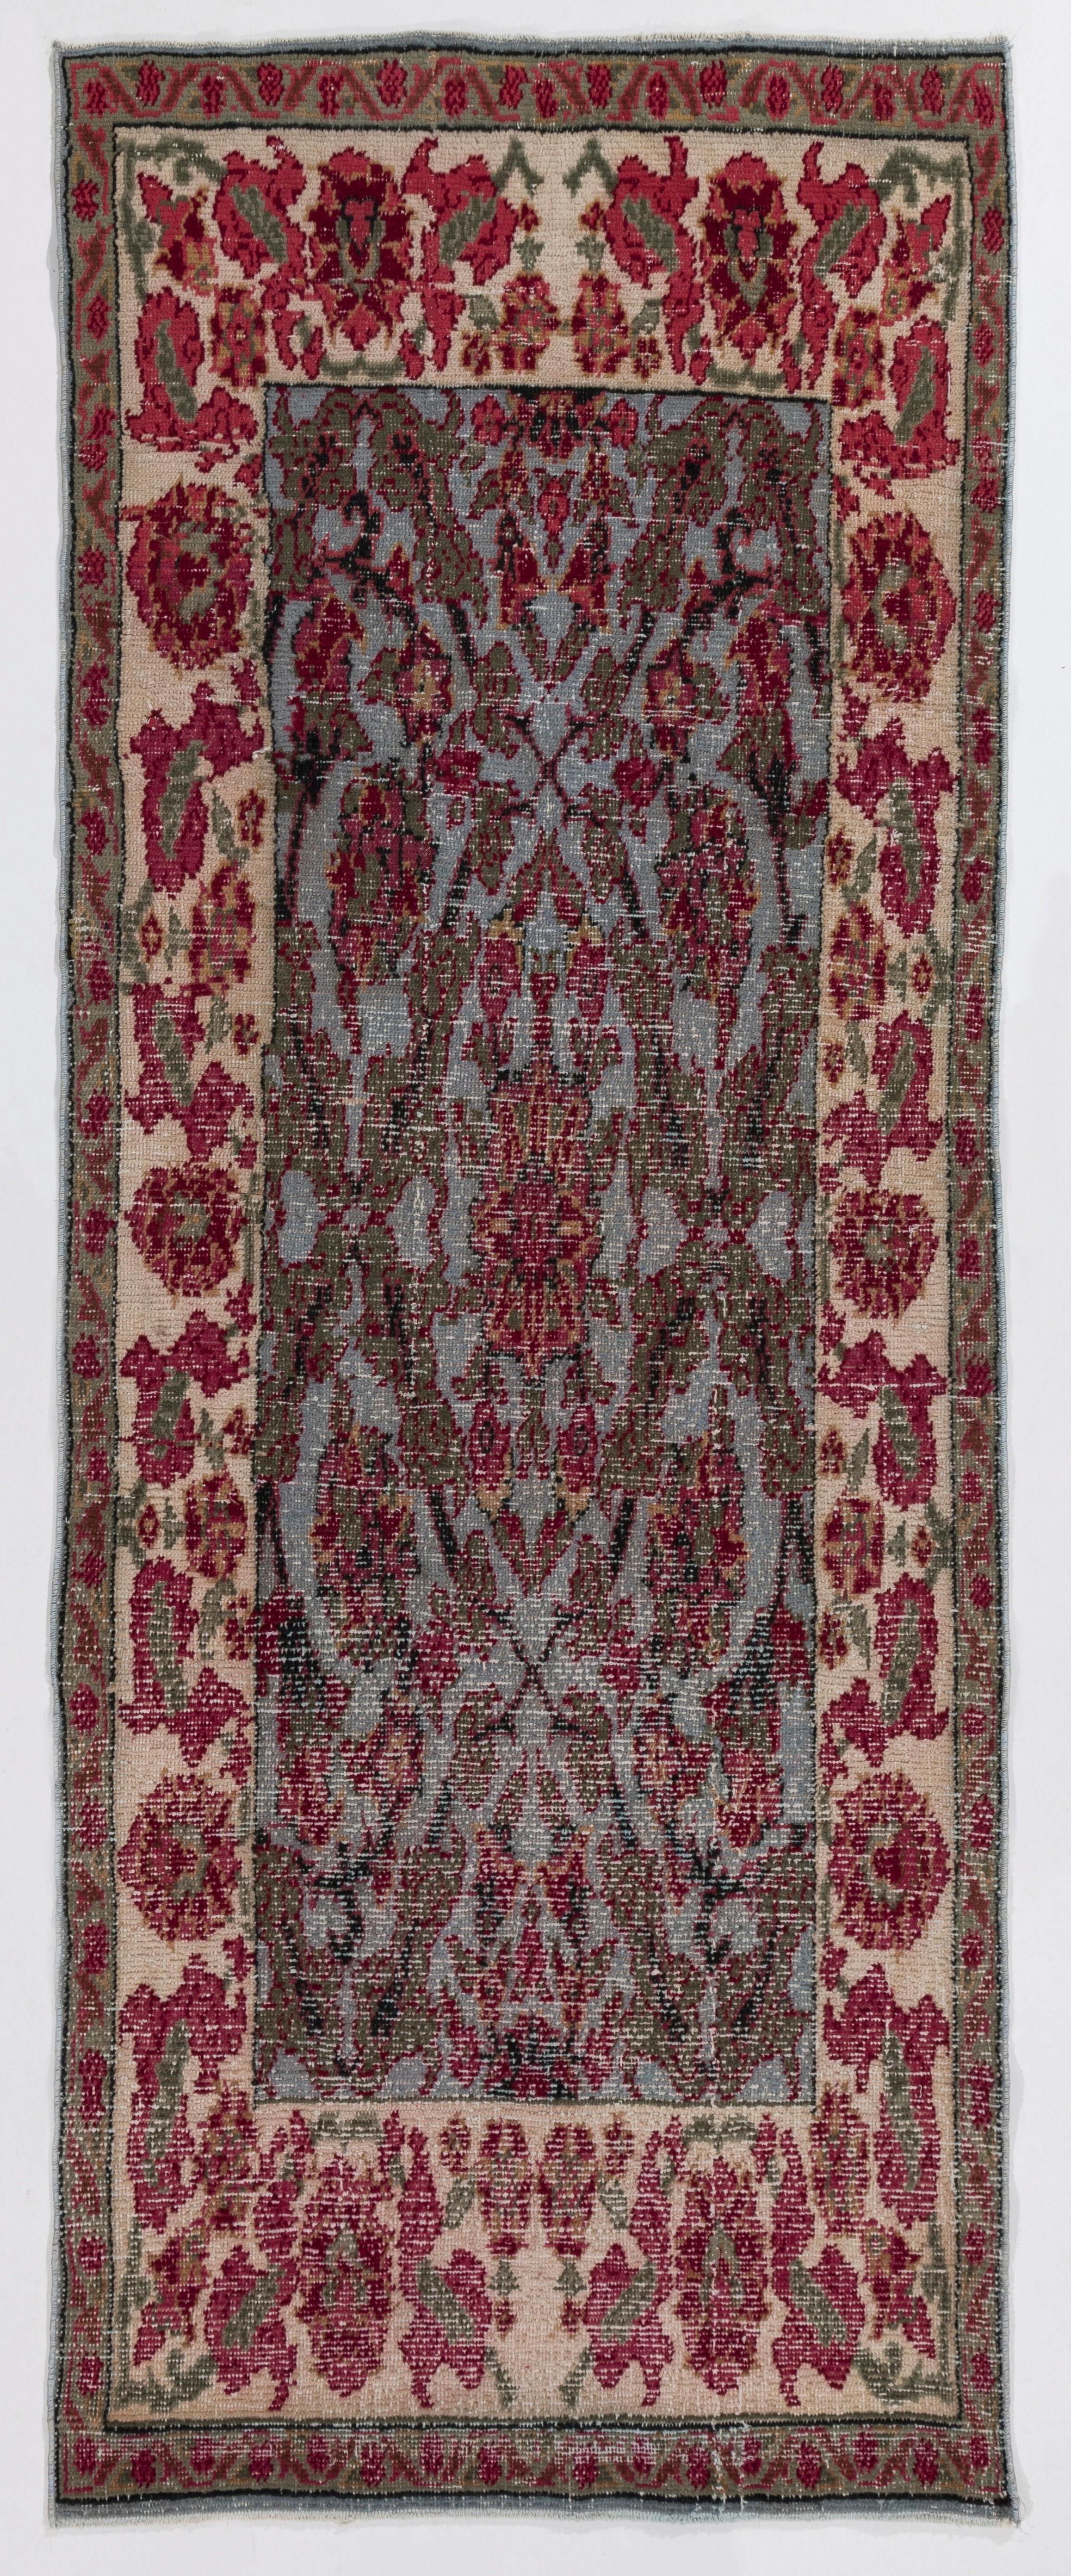 A finely hand knotted vintage Central Anatolian rug with a Classic garden design with flowers, spandrels, blossoms, leaves and branches with pleasant colors. Measures: 3.3 x 8.2 Ft

Wool pile on a tightly woven cotton foundation, very good